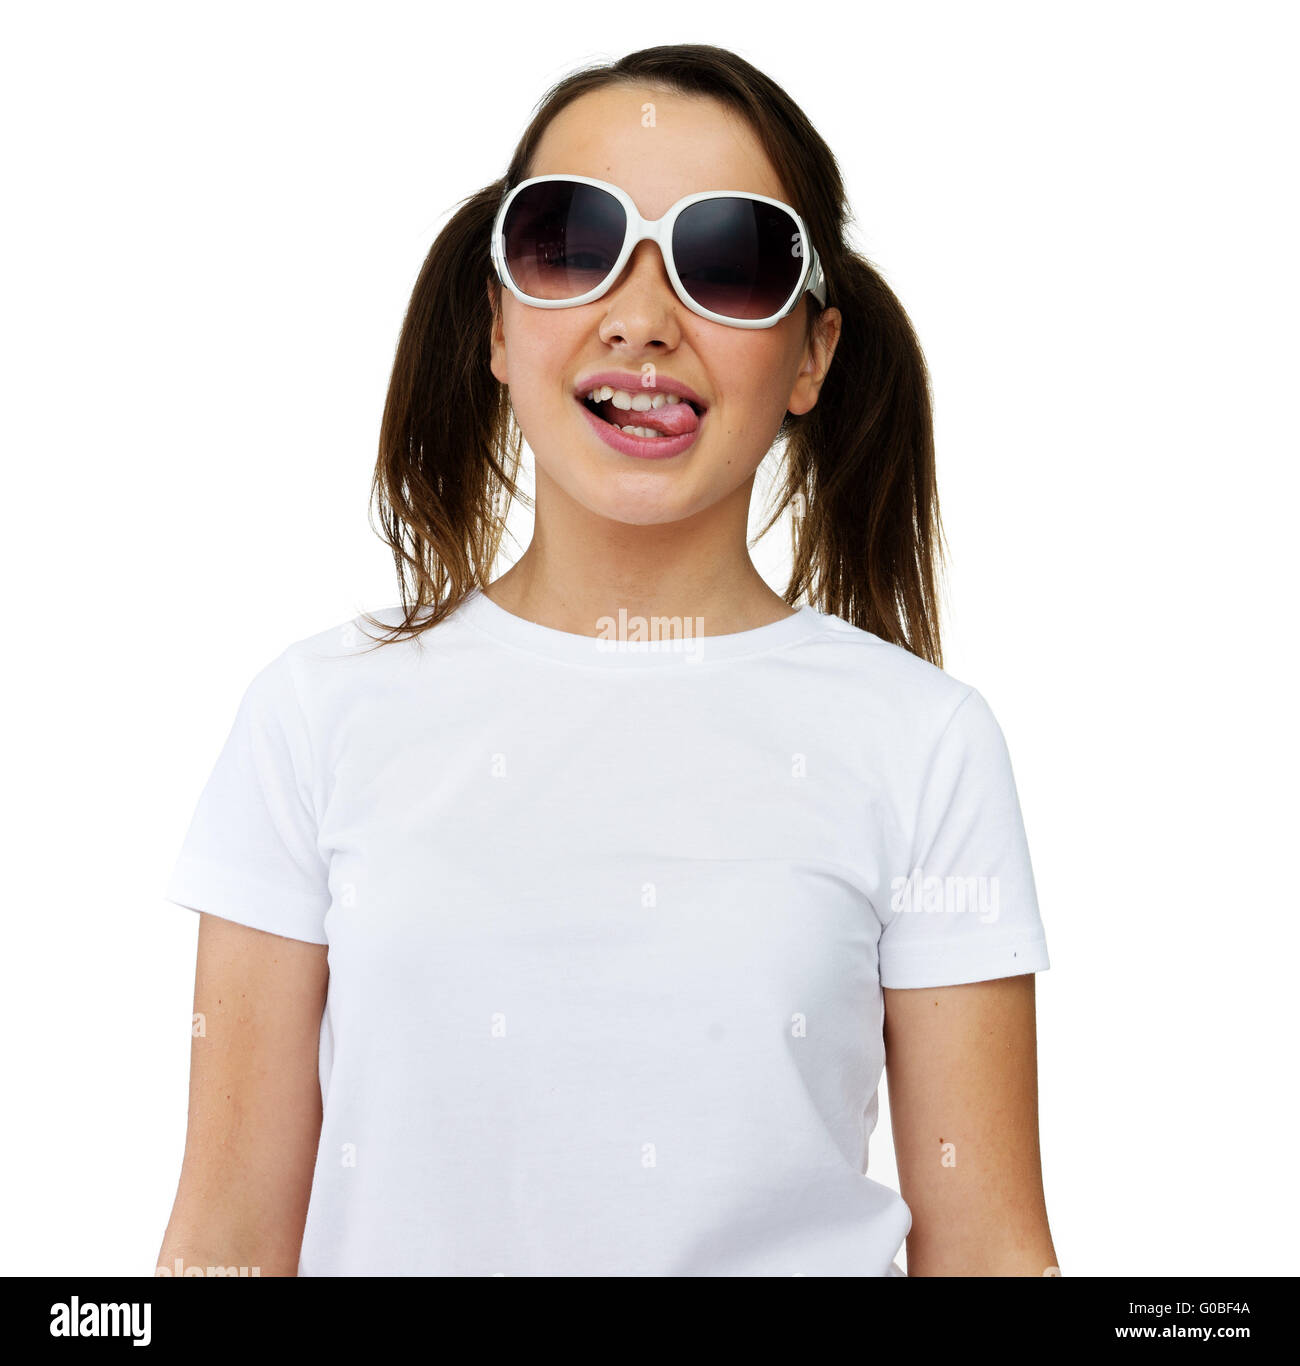 Smiling pretty young girl in trendy sunglasses Stock Photo